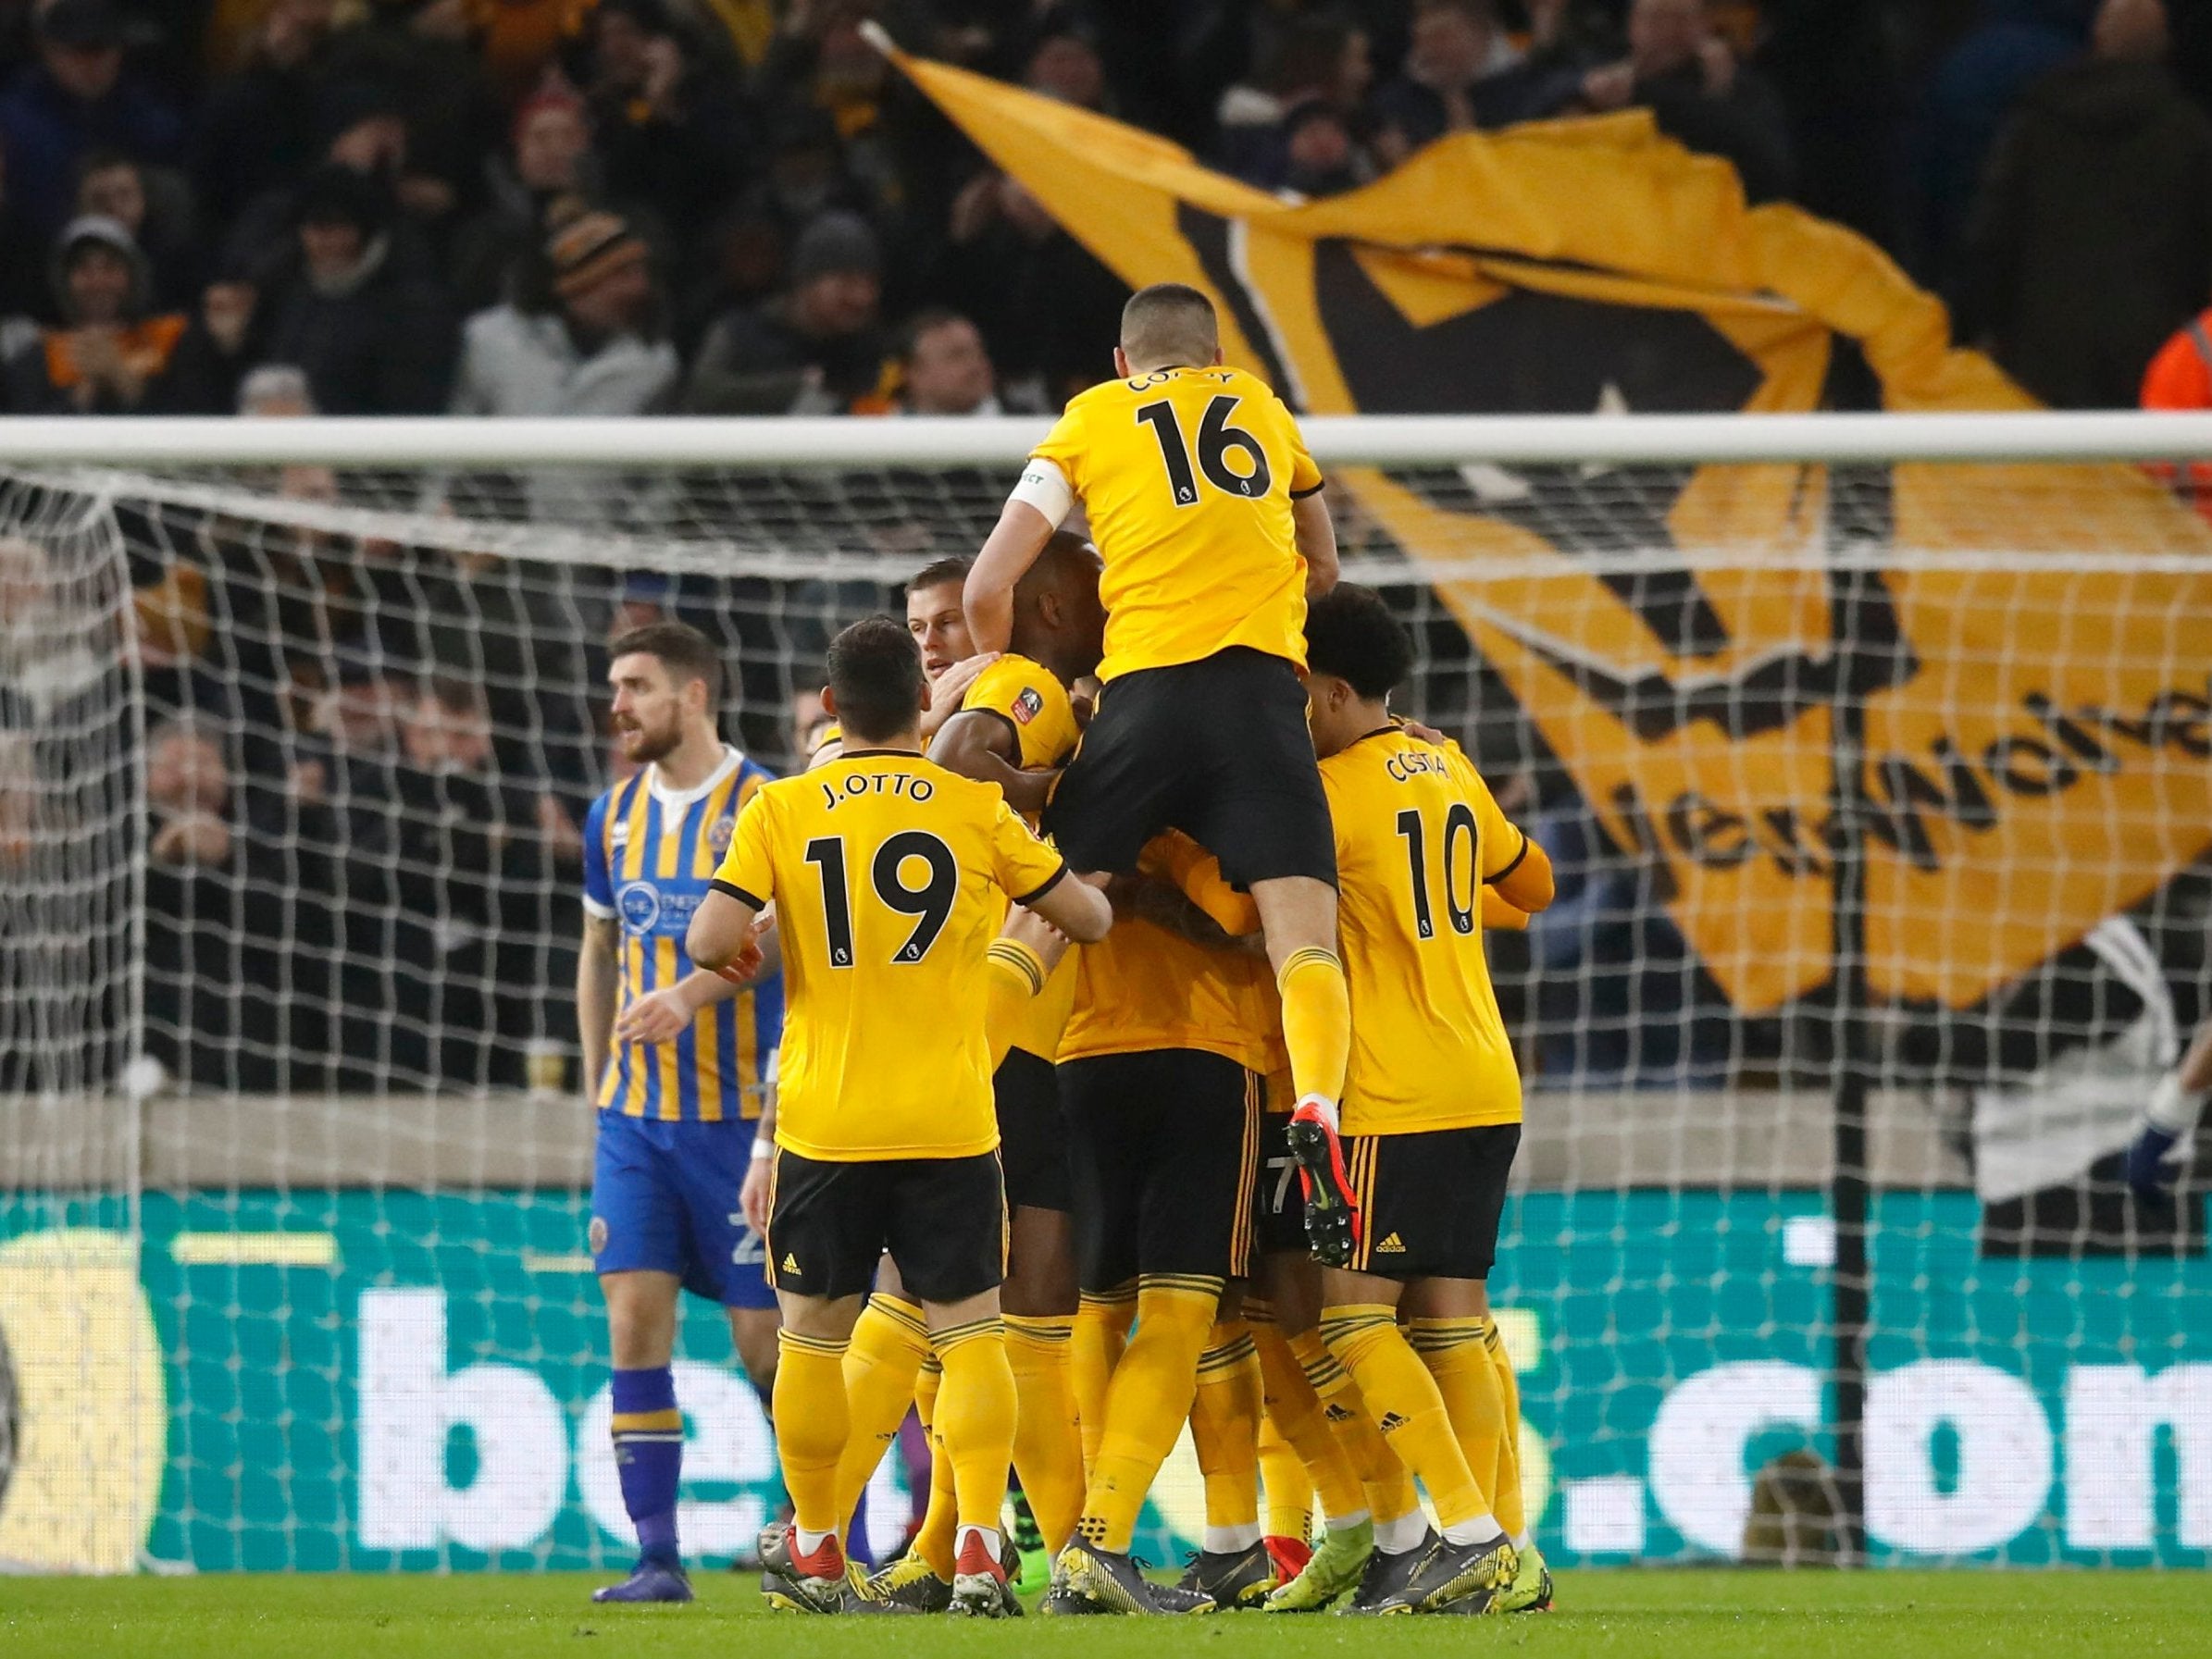 Wolves will face Bristol City in the FA Cup fifth round